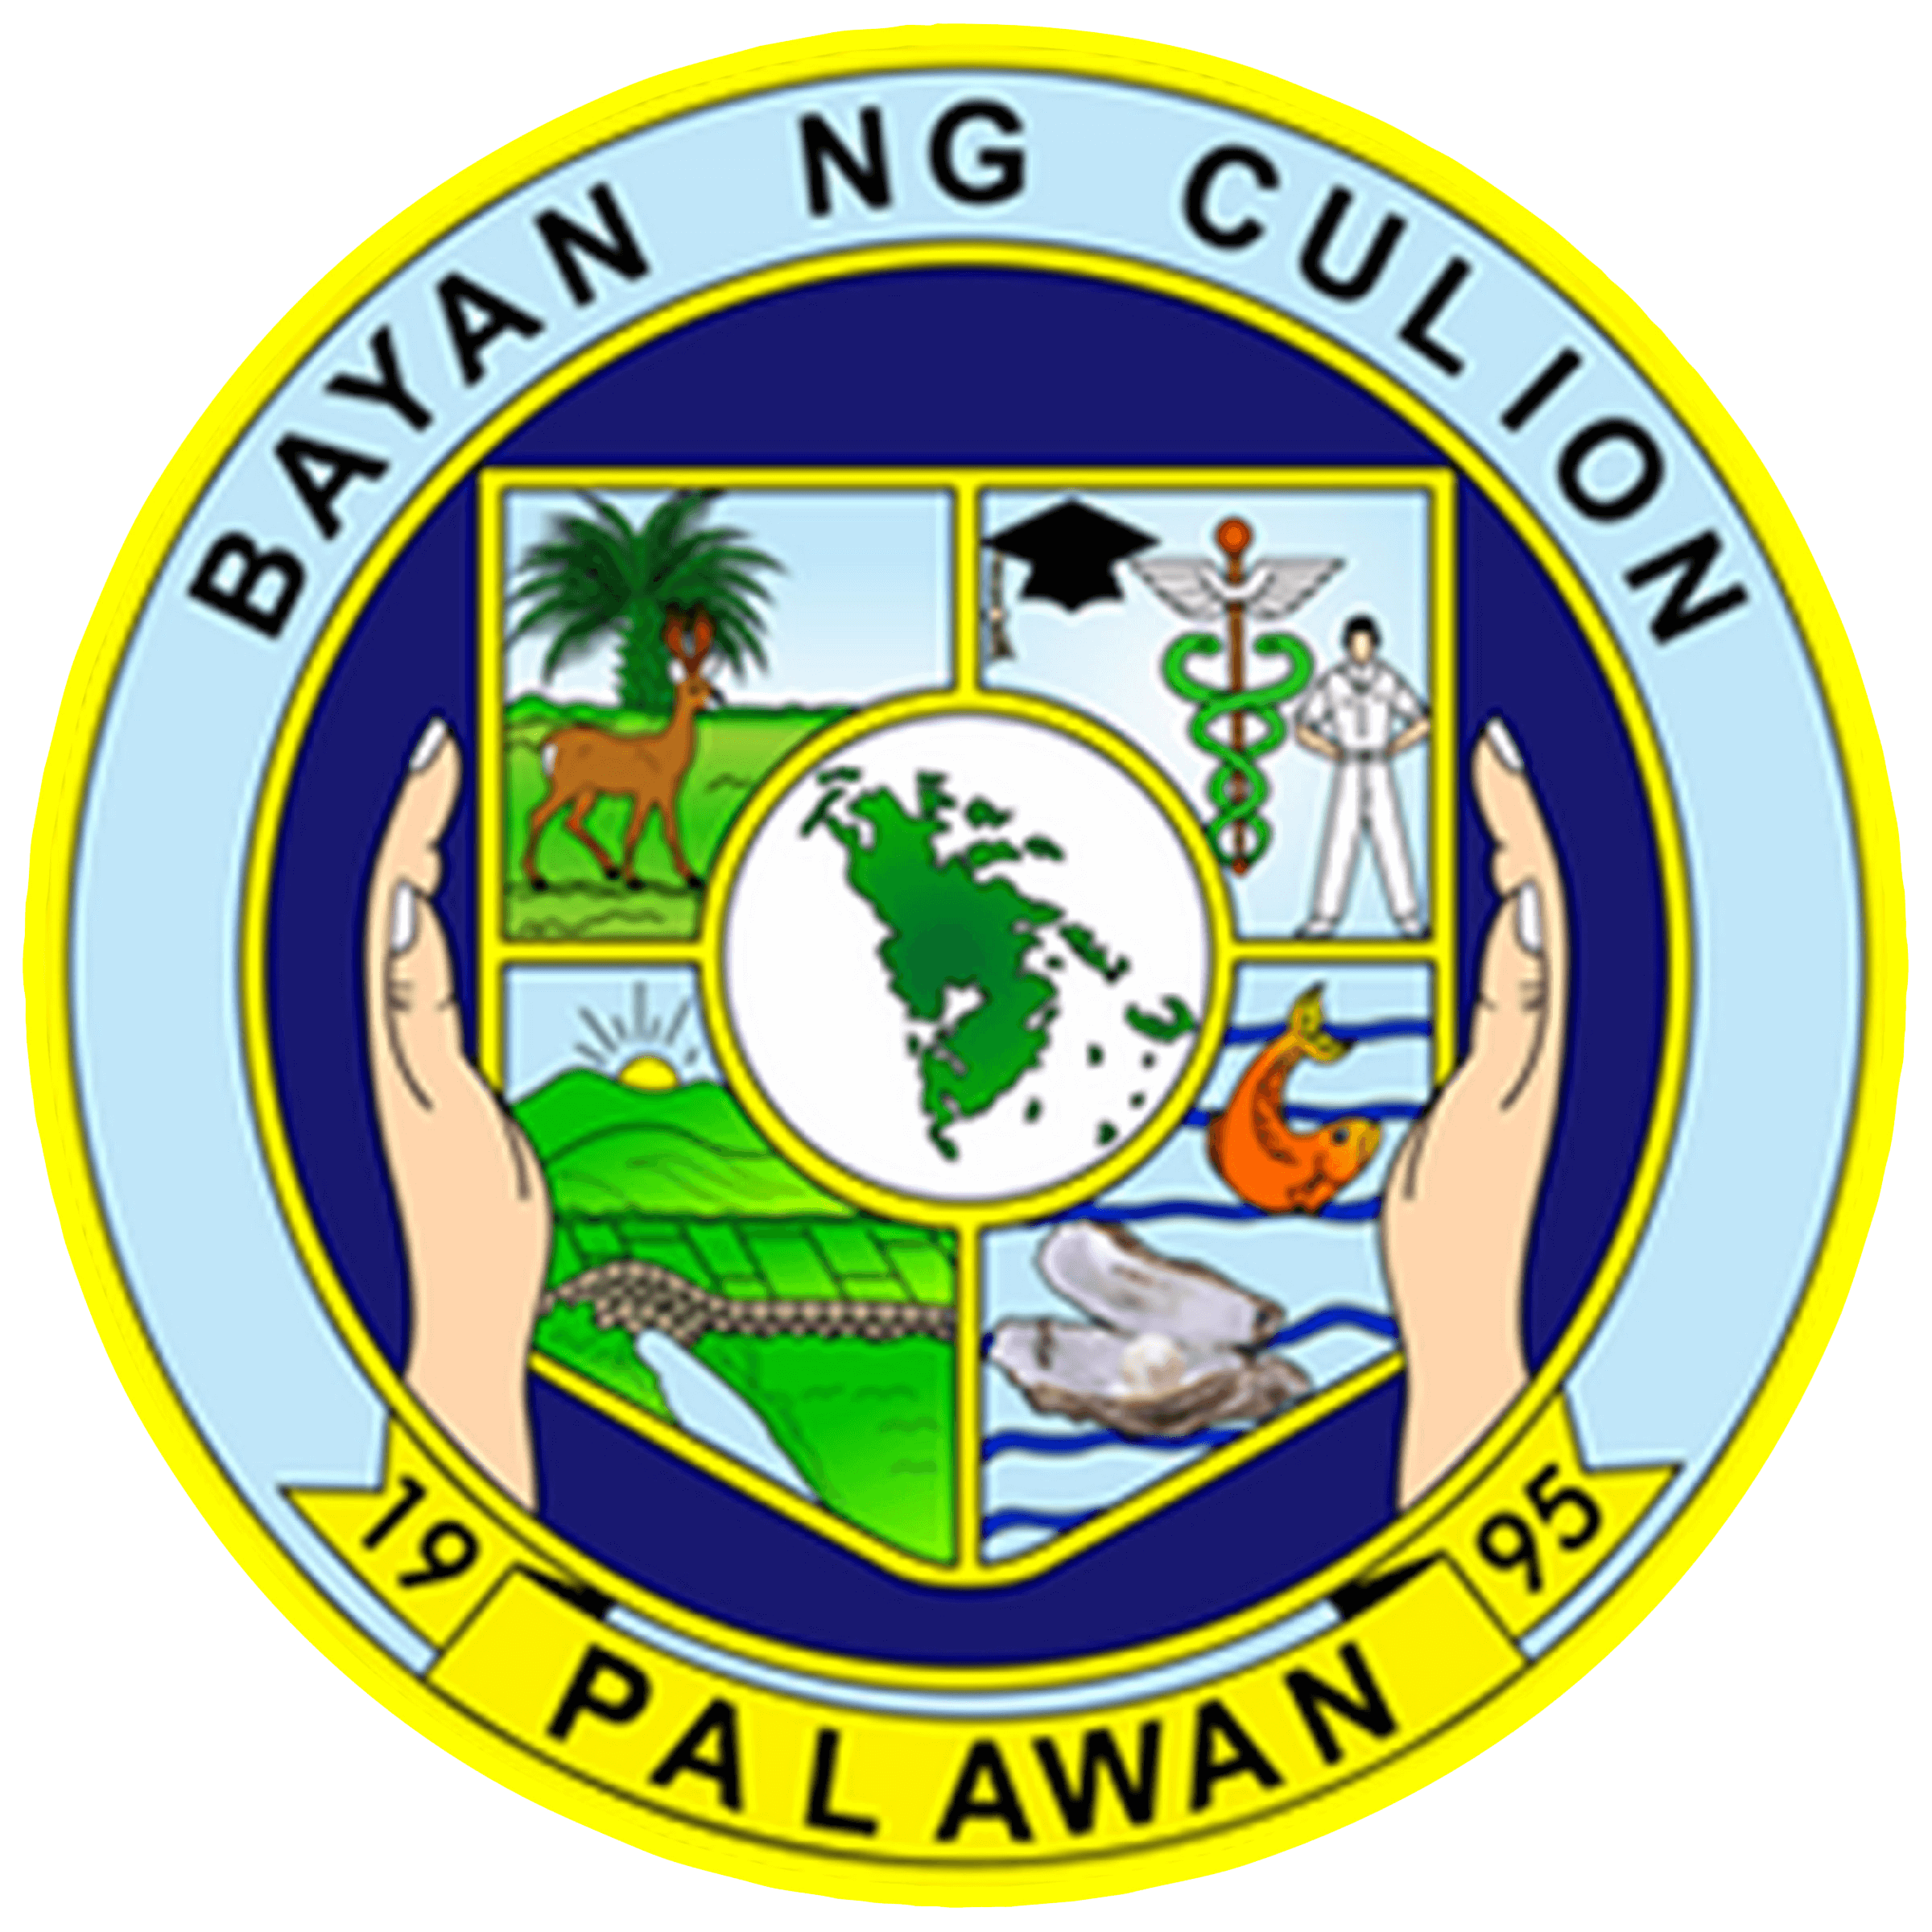 Palawan Logo - Government – The Official Website of Culion Palawan